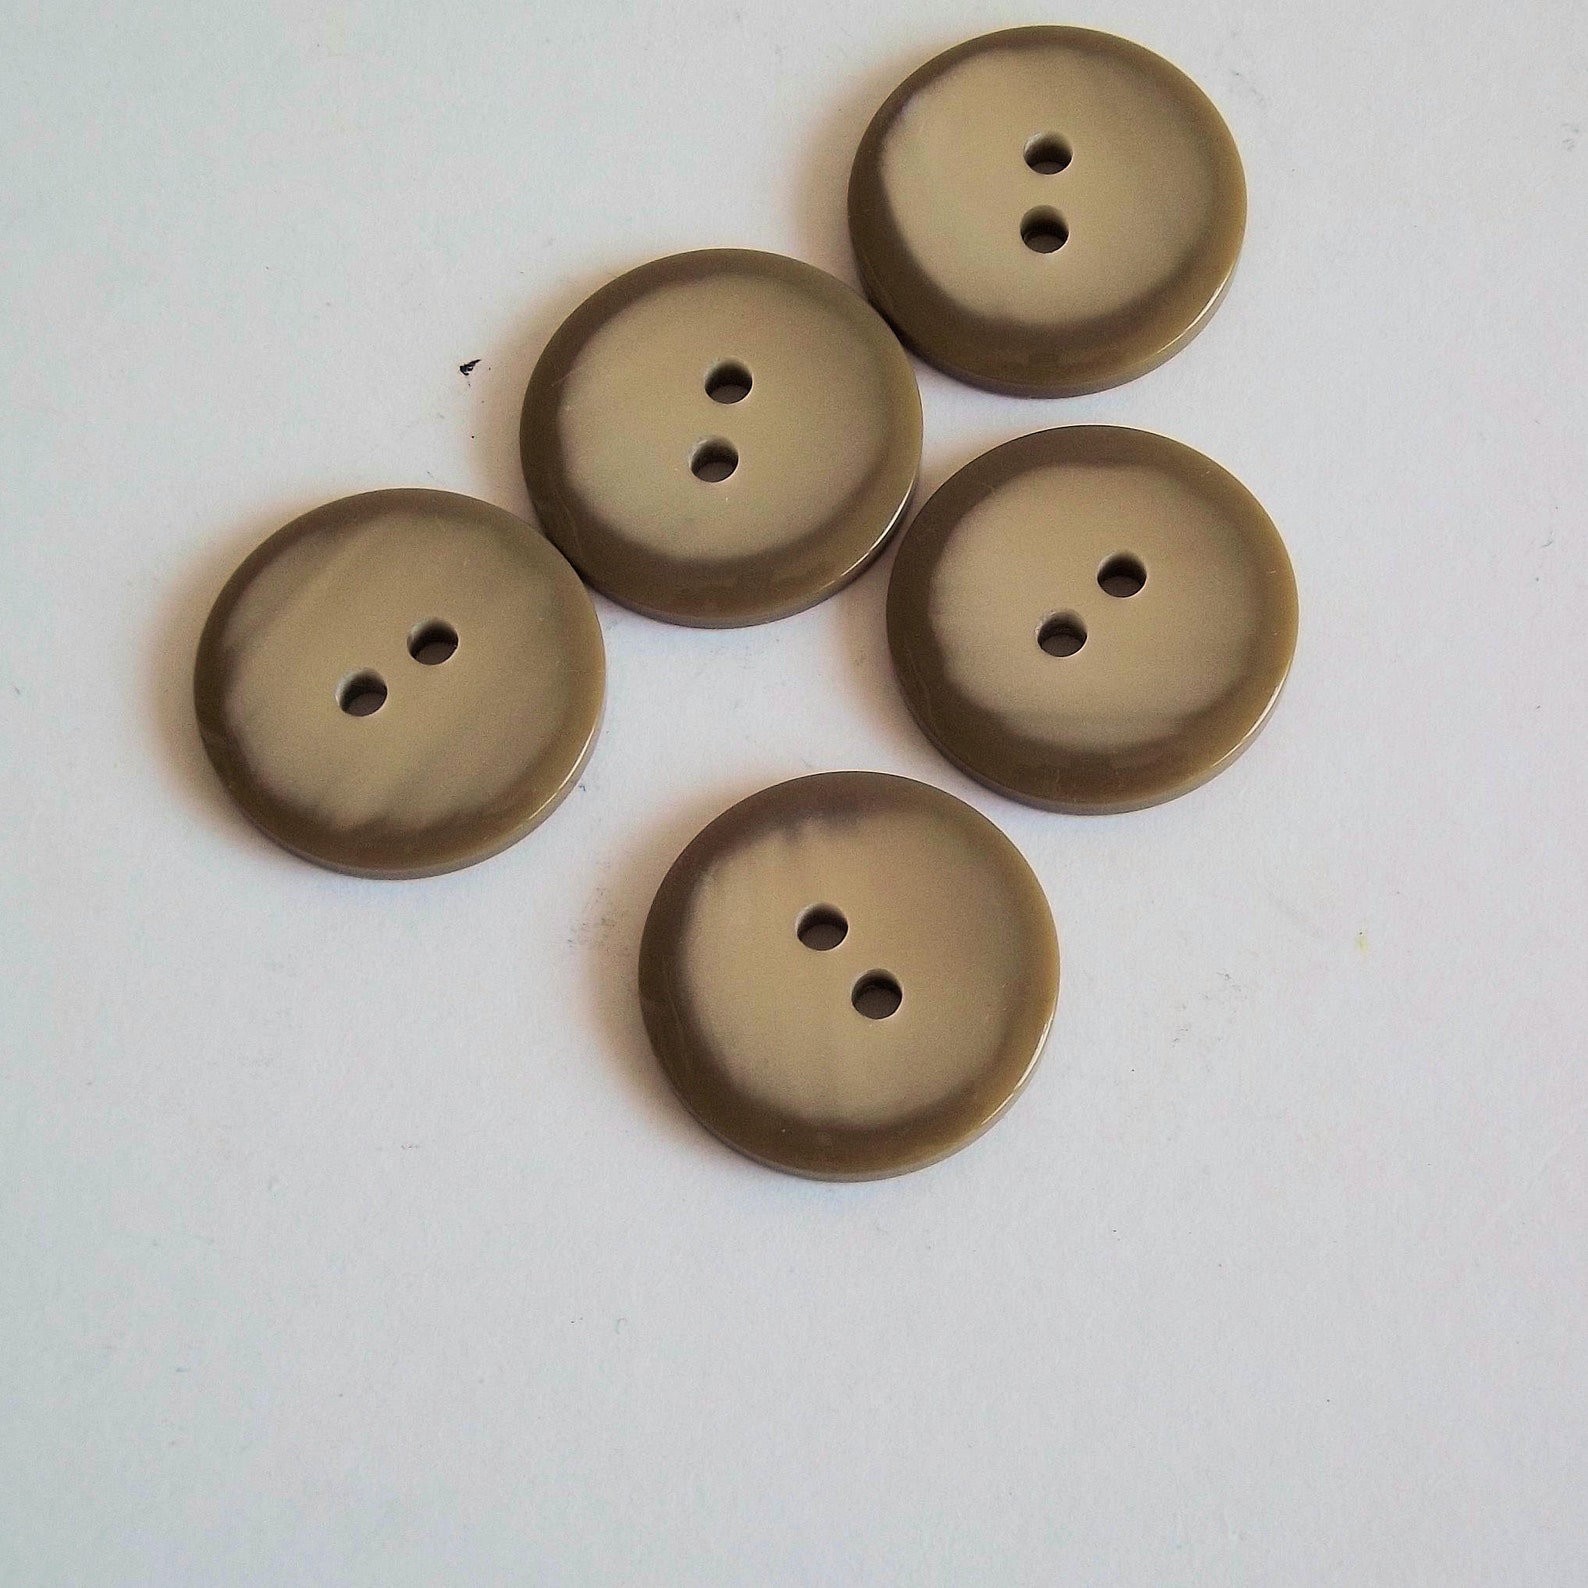 Beige buttons Pearly Beige 2 hole Buttons 19mm Buttons 2 | Etsy